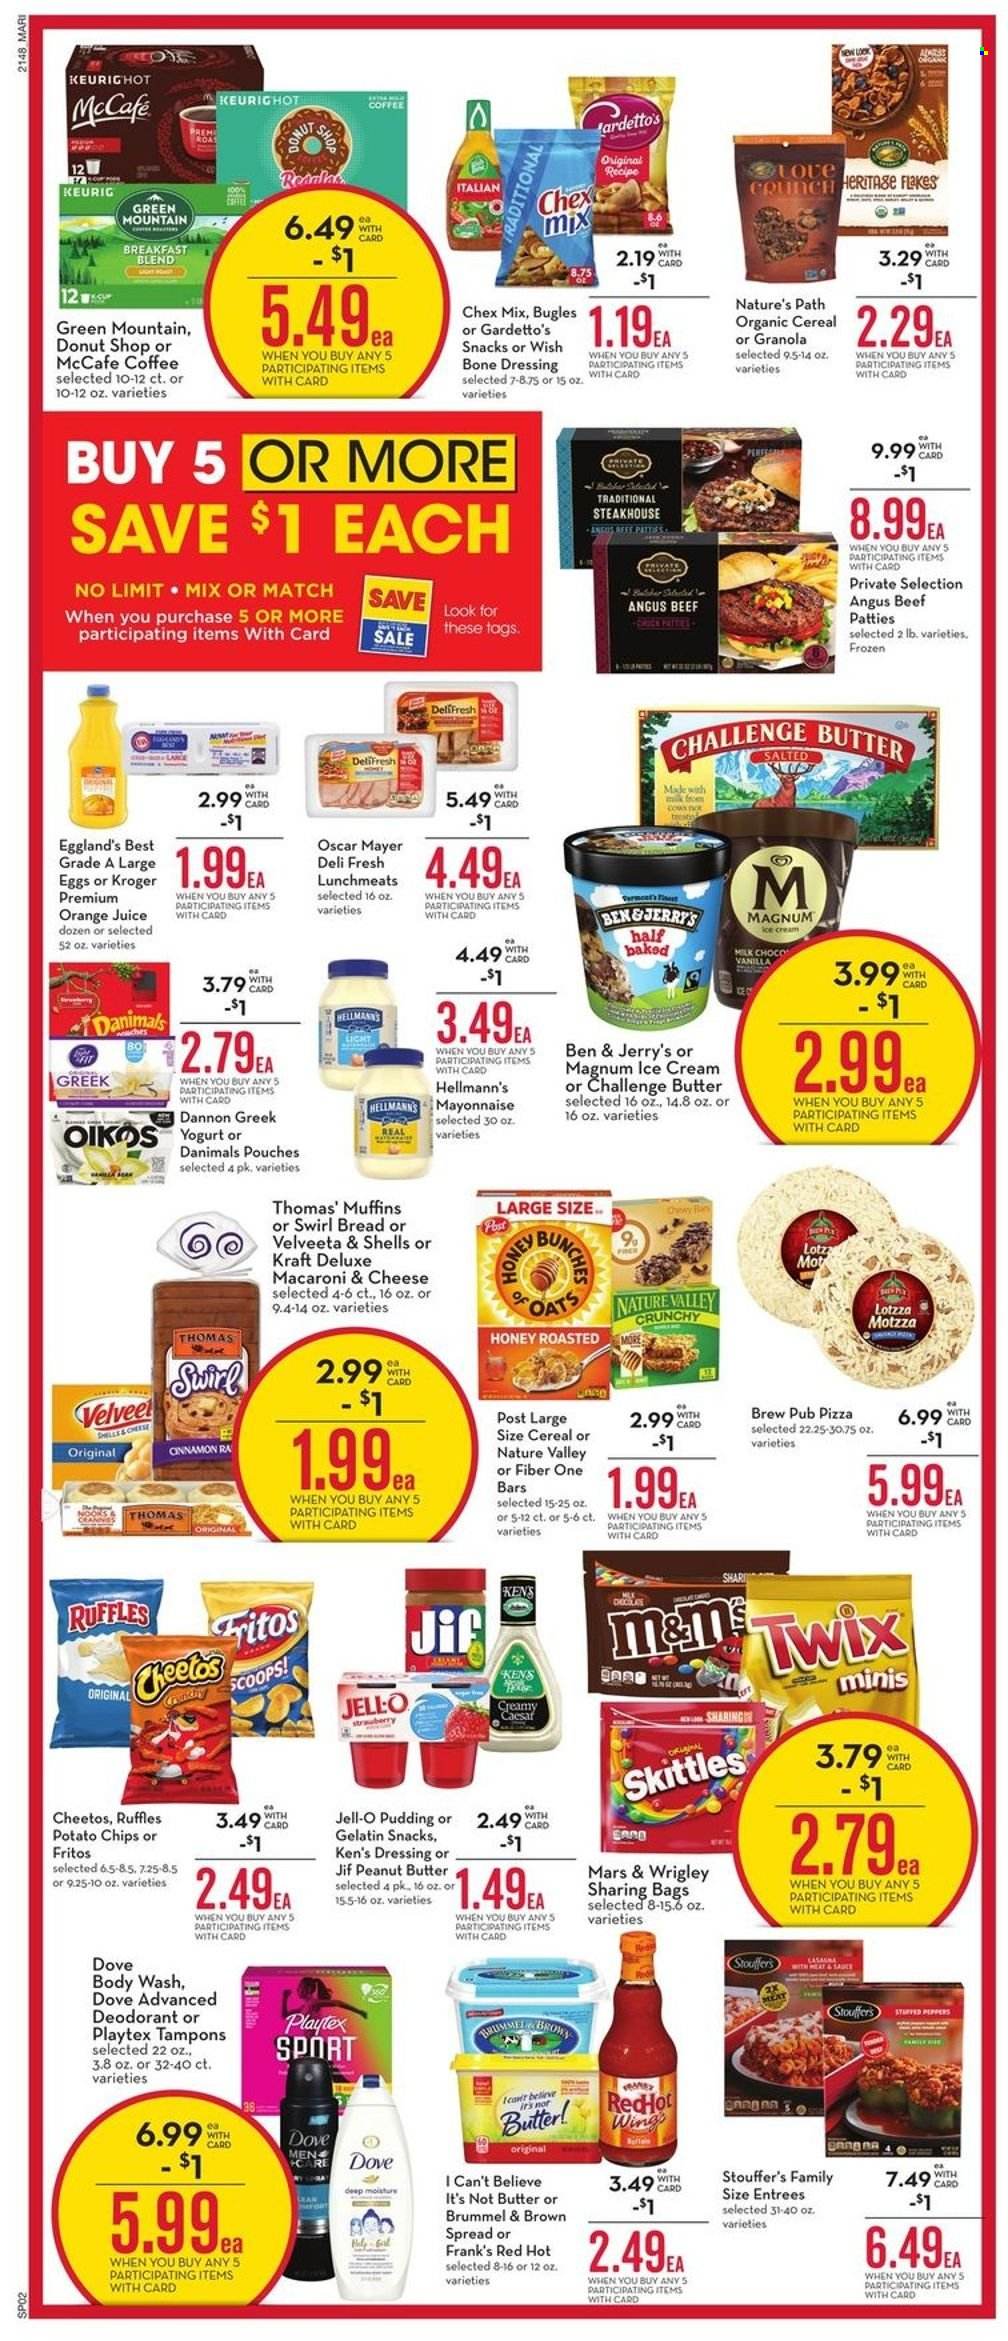 thumbnail - Mariano’s Flyer - 12/29/2021 - 01/04/2022 - Sales products - bread, muffin, macaroni & cheese, pizza, lasagna meal, Kraft®, Oscar Mayer, lunch meat, pudding, yoghurt, Oikos, Dannon, Danimals, large eggs, I Can't Believe It's Not Butter, mayonnaise, Hellmann’s, Magnum, ice cream, Ben & Jerry's, Stouffer's, snack, Twix, Mars, Skittles, Fritos, potato chips, Cheetos, Ruffles, Chex Mix, oats, Jell-O, cereals, granola, Nature Valley, Fiber One, dressing, honey, peanut butter, Jif, orange juice, juice, coffee, McCafe, Keurig, breakfast blend, Green Mountain, beef meat, bunches. Page 2.